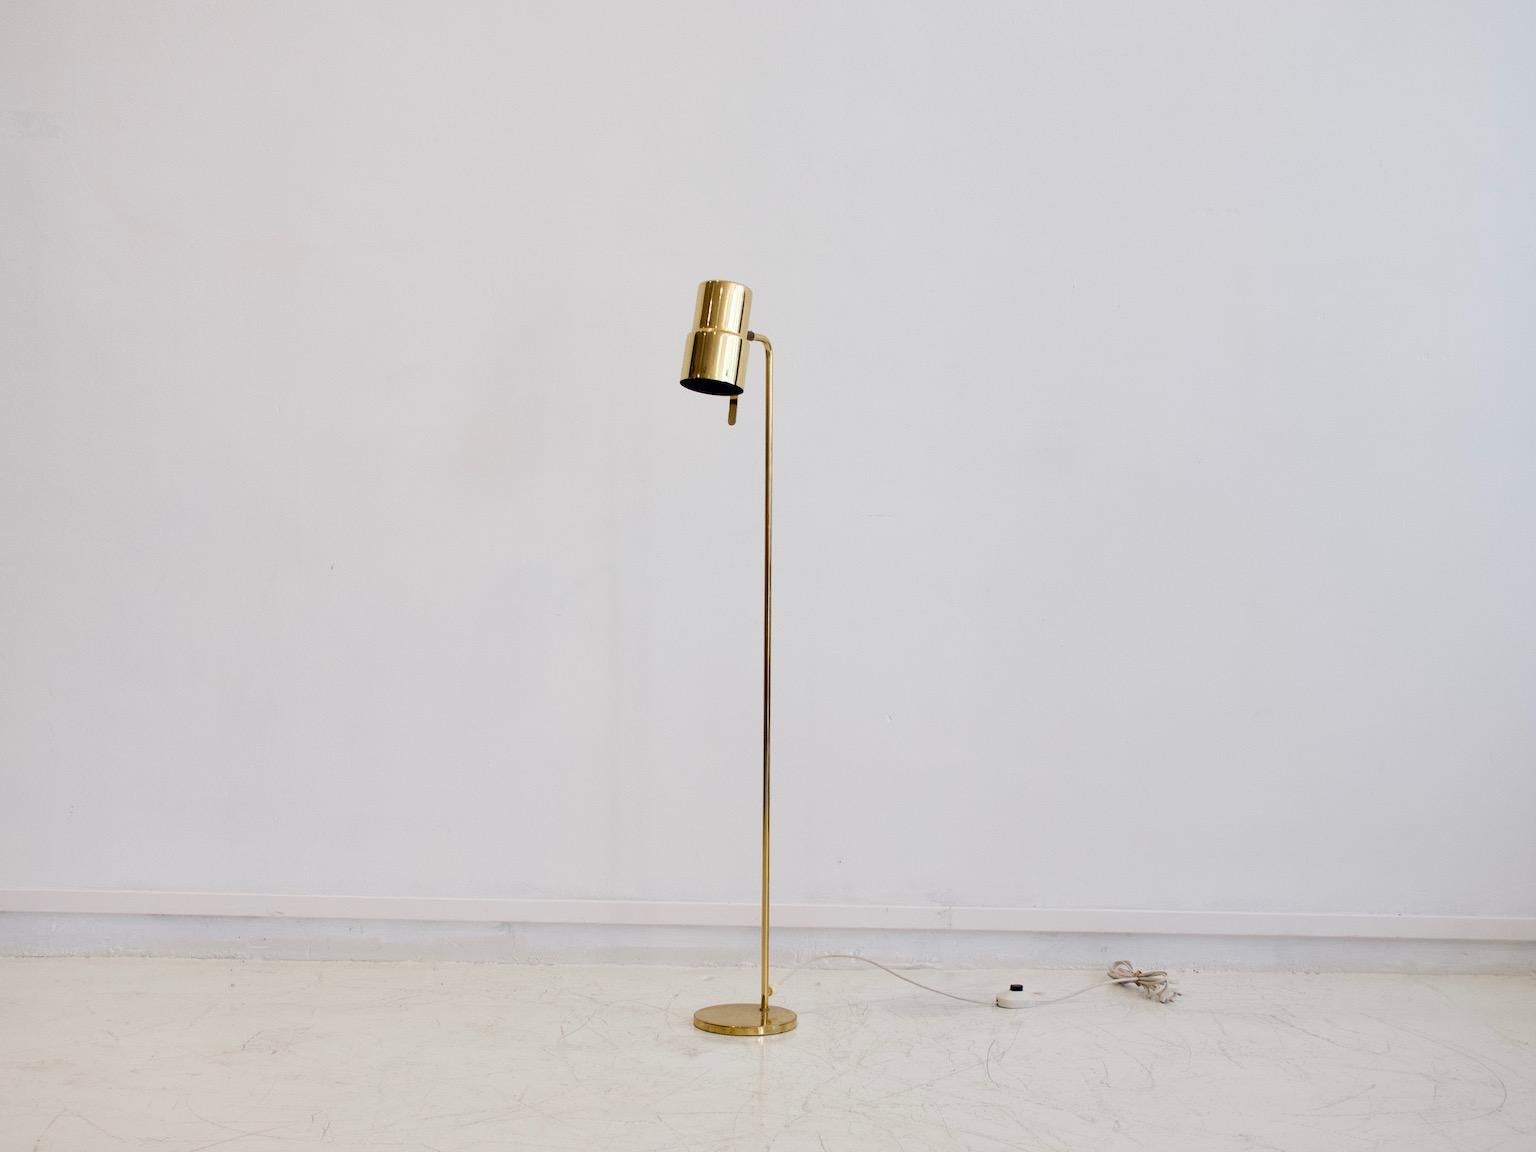 Polished brass floor light designed by Hans-Agne Jakobsson and manufactured by Markaryd in Sweden. Great vintage condition, minor wear on brass. Labeled by maker.